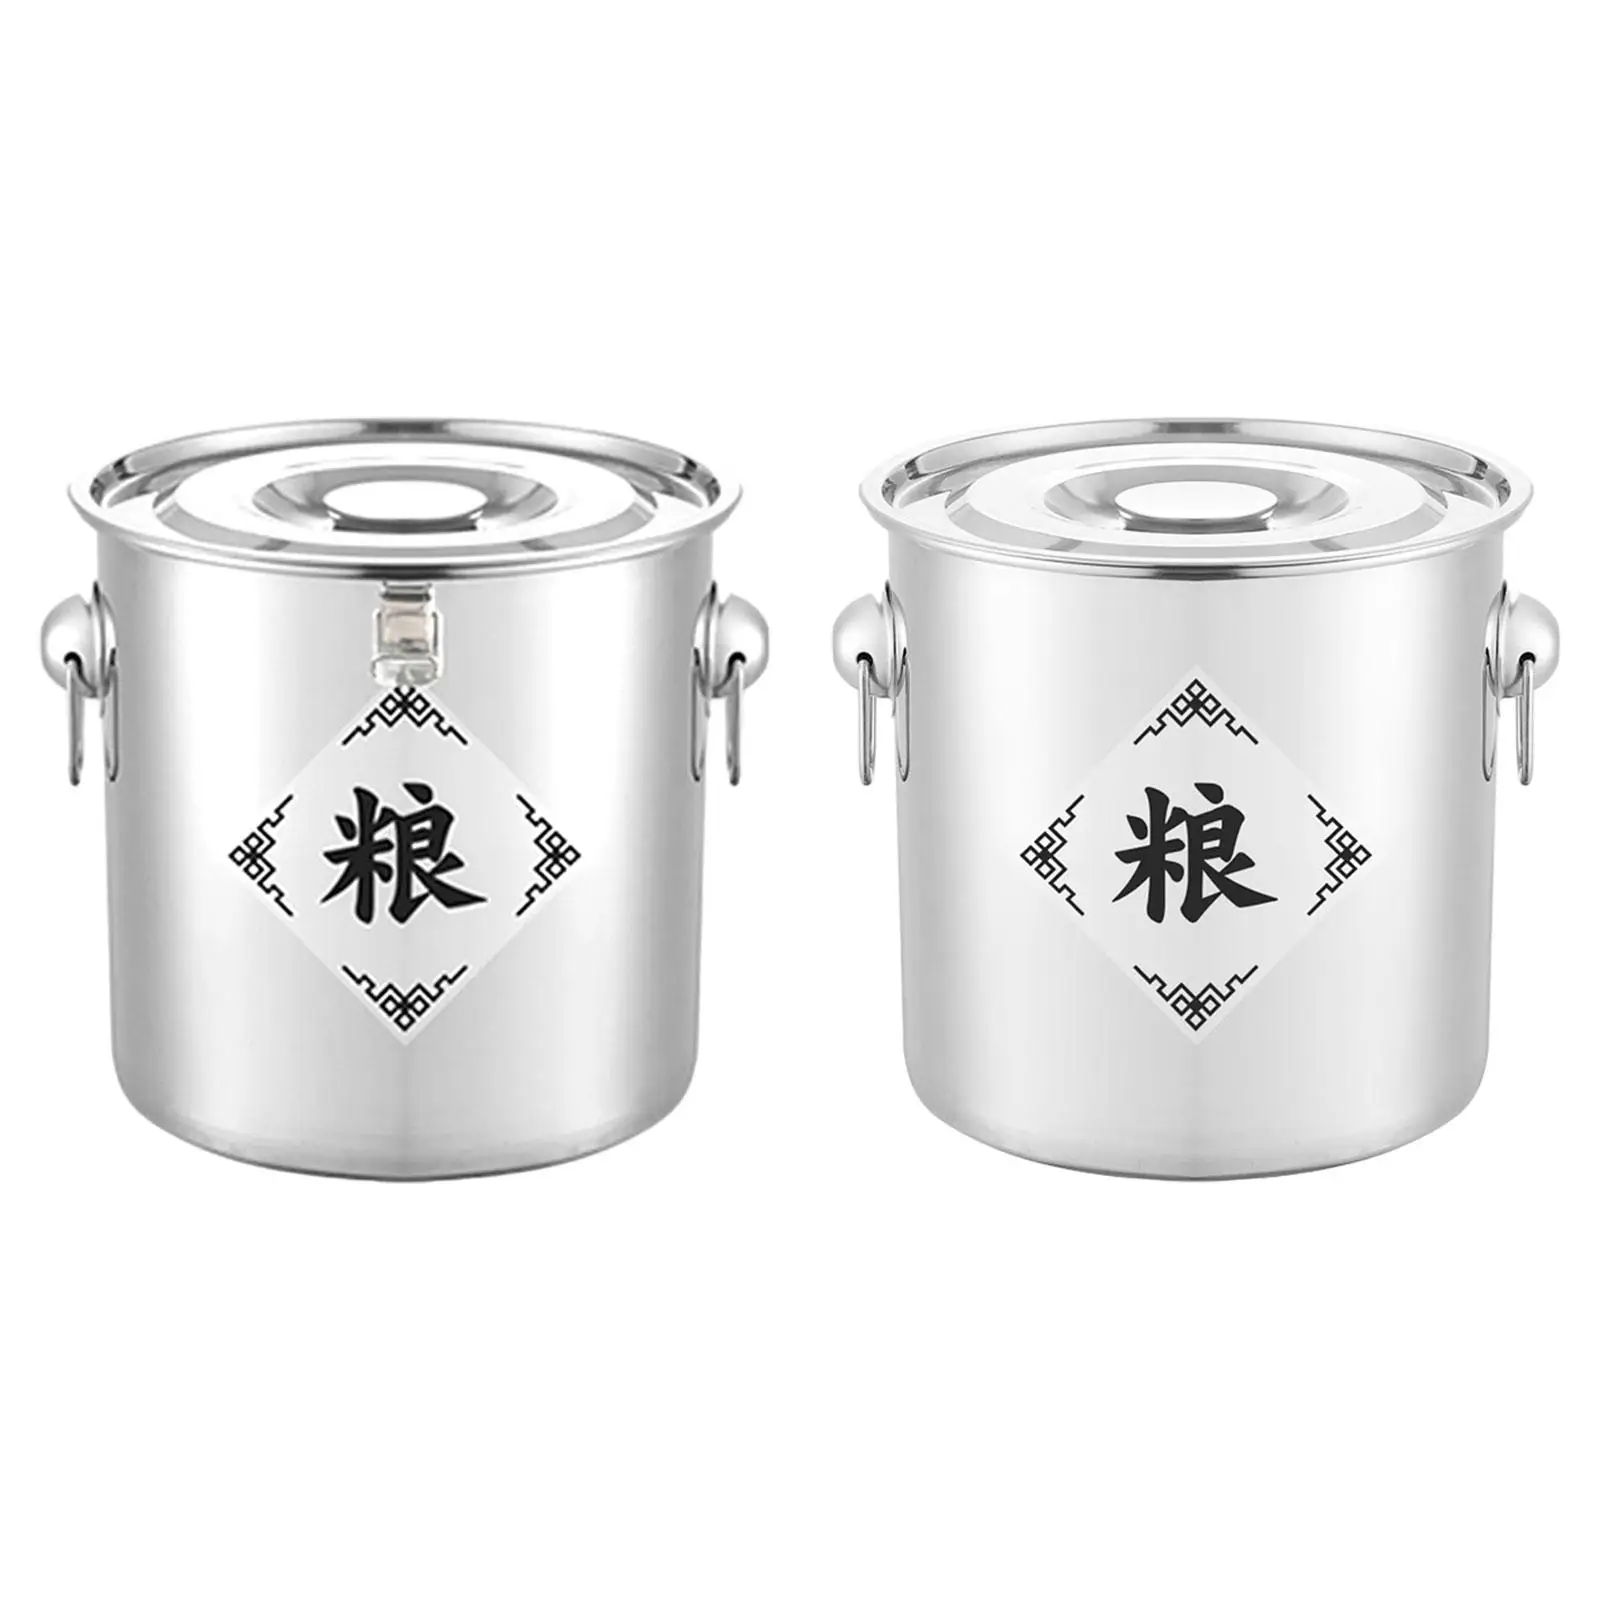 Rice Container Round Stainless Steel Pantry Storage for Grain Coffee Flour